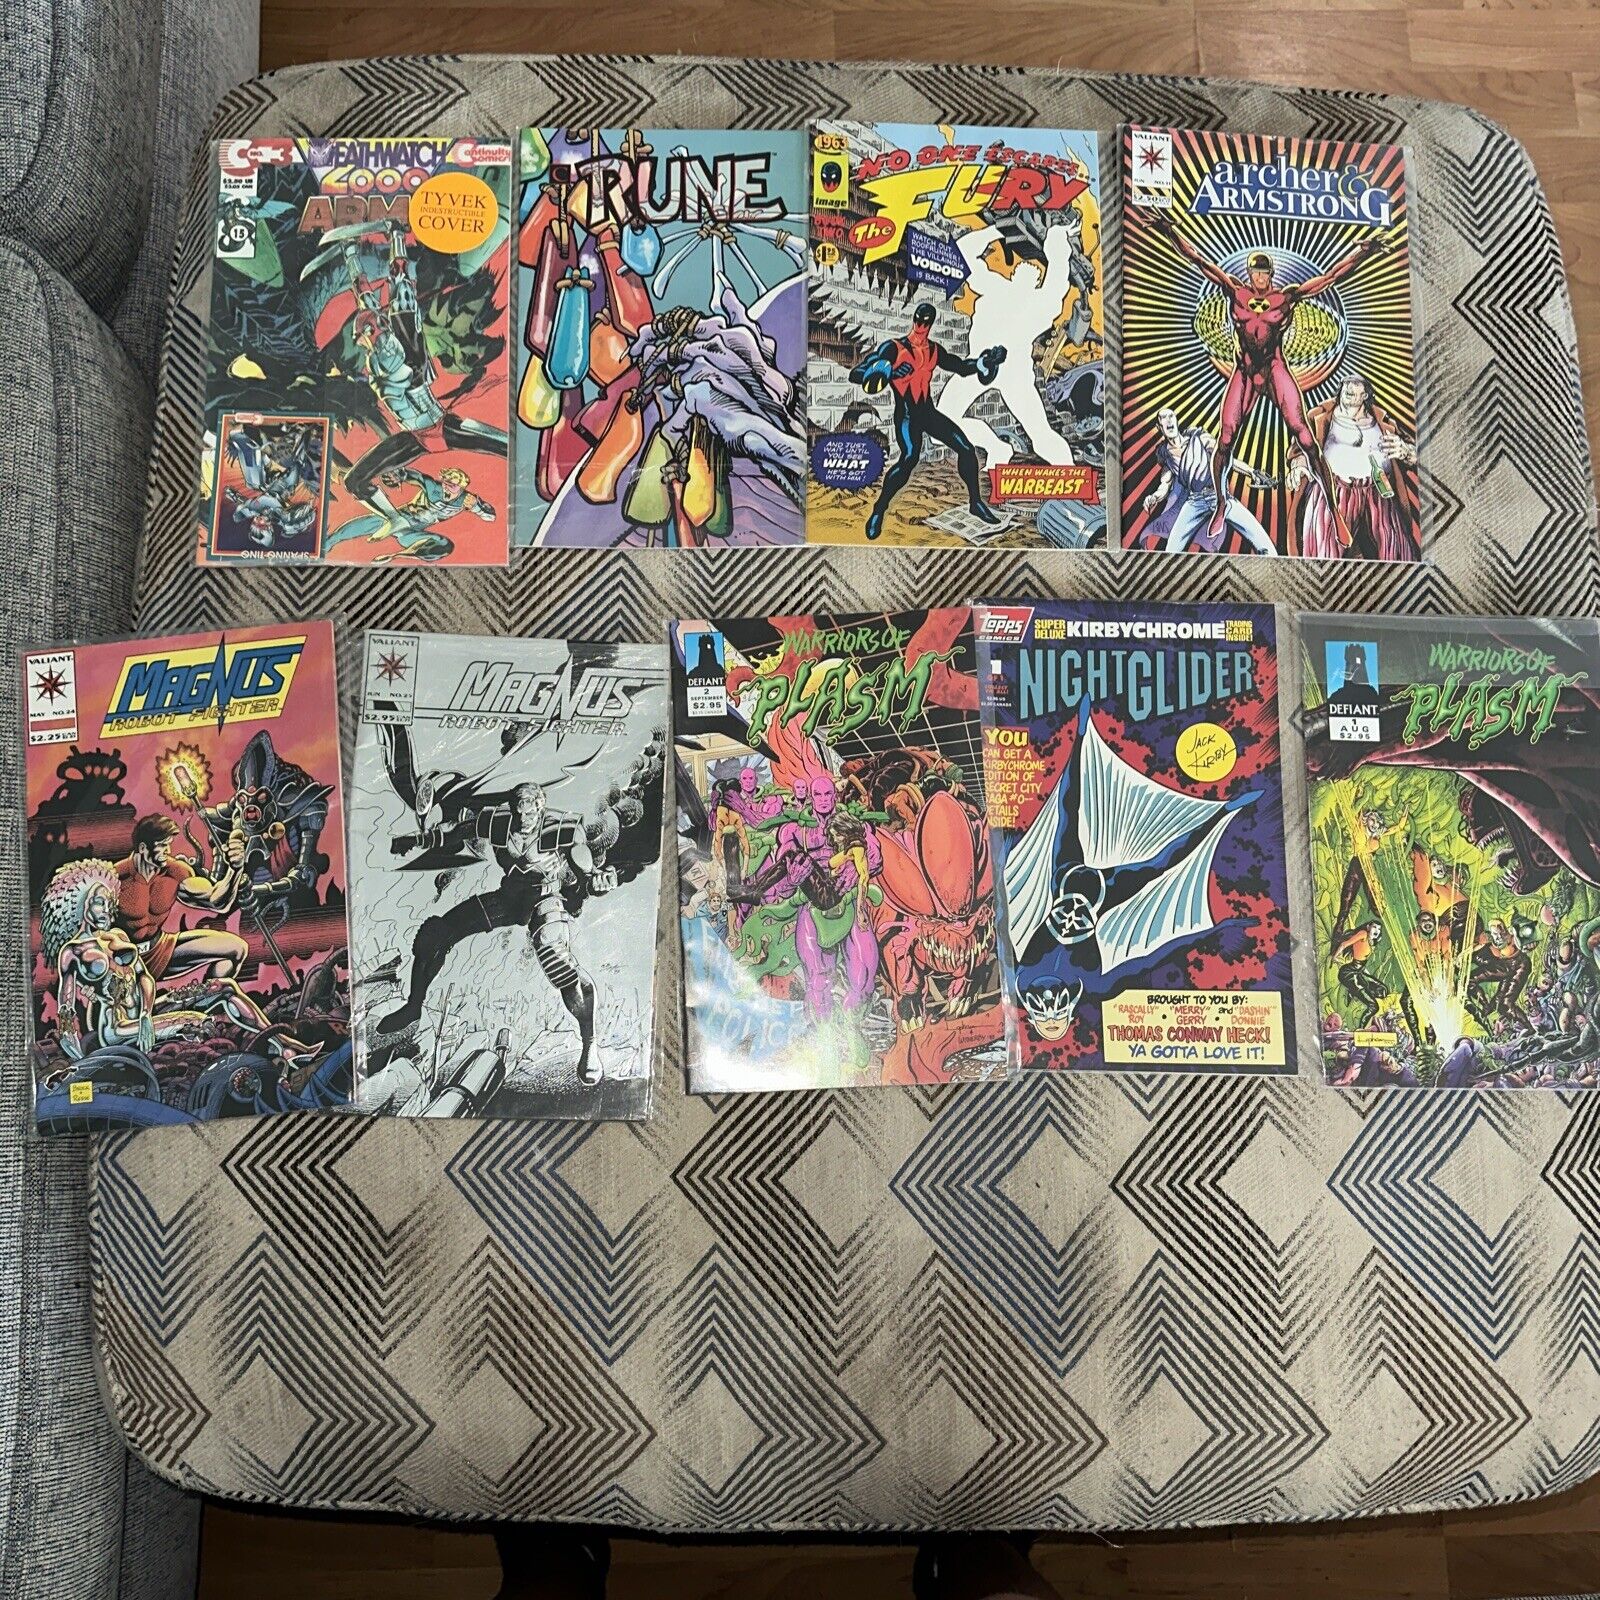 Group Of Comics 80-90s Classic Vintage #9 Let Me Know If You Want A Specific One